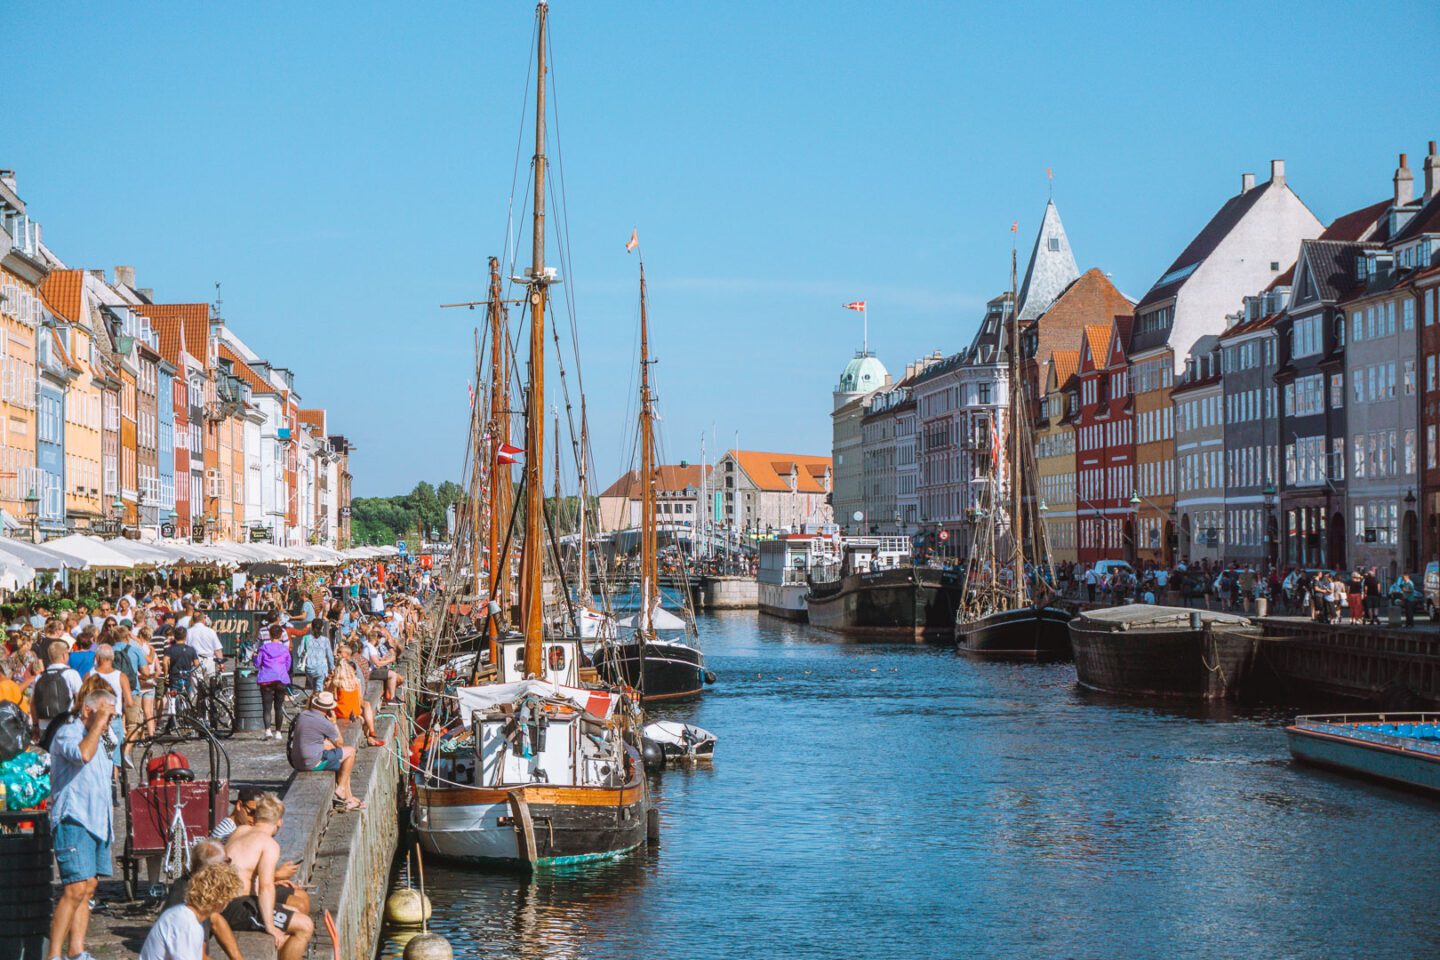 Nyhavn, the charming 17th-century waterfront district in Copenhagen that is a top thing to do for any tourist. The area is lined with colourful historic buildings, and numerous boats bobbing on the canal.